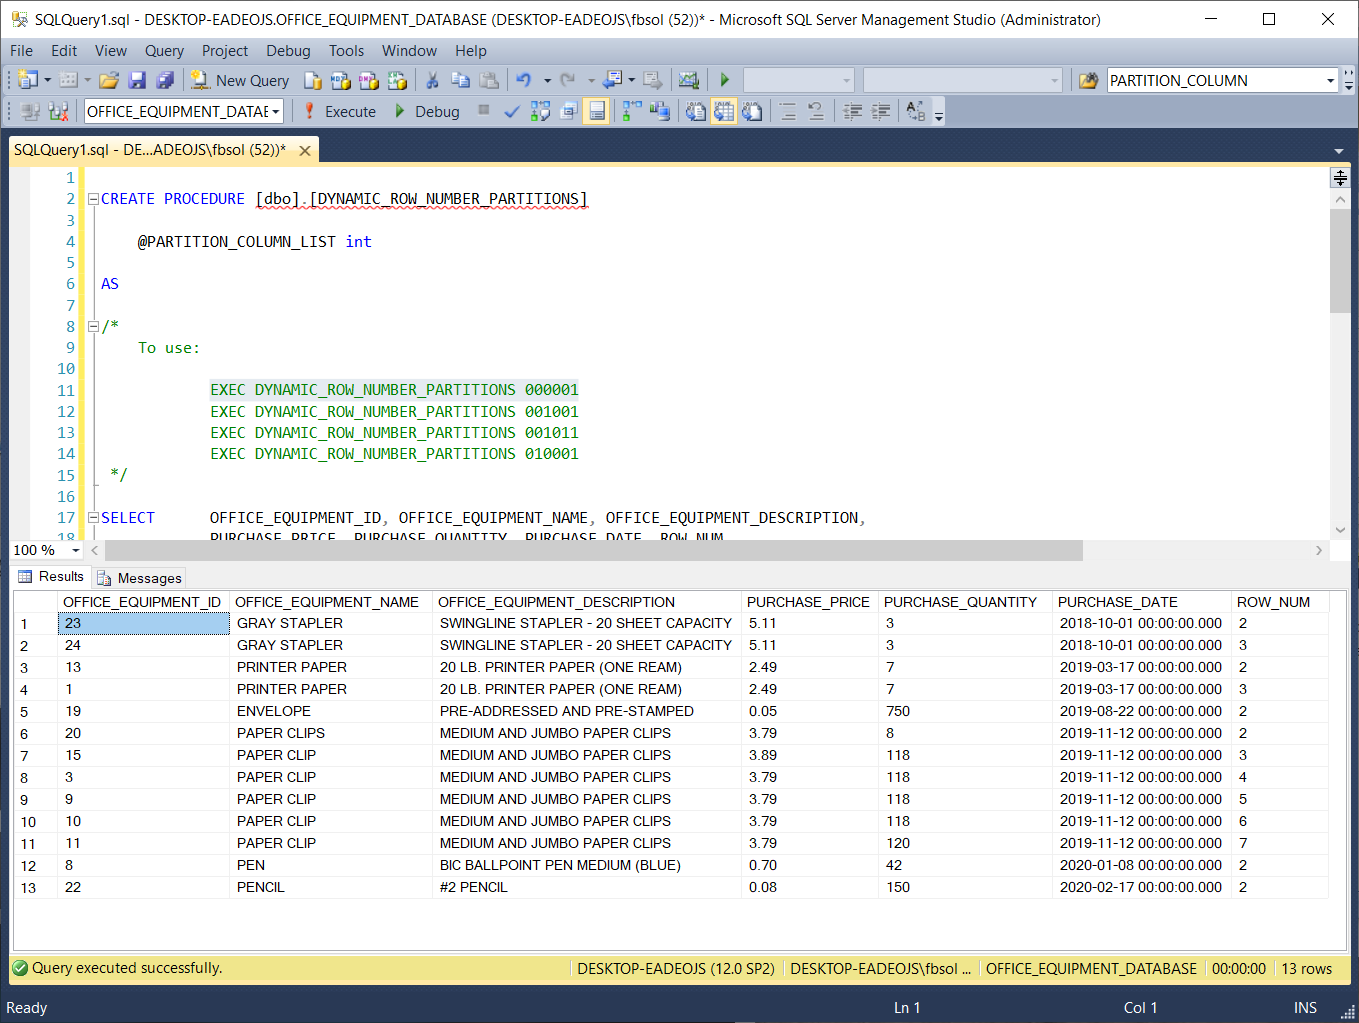 Testing the DYNAMIC_ROW_NUMBER_PARTITIONS stored procedure, with a T-SQL EXEC statement.